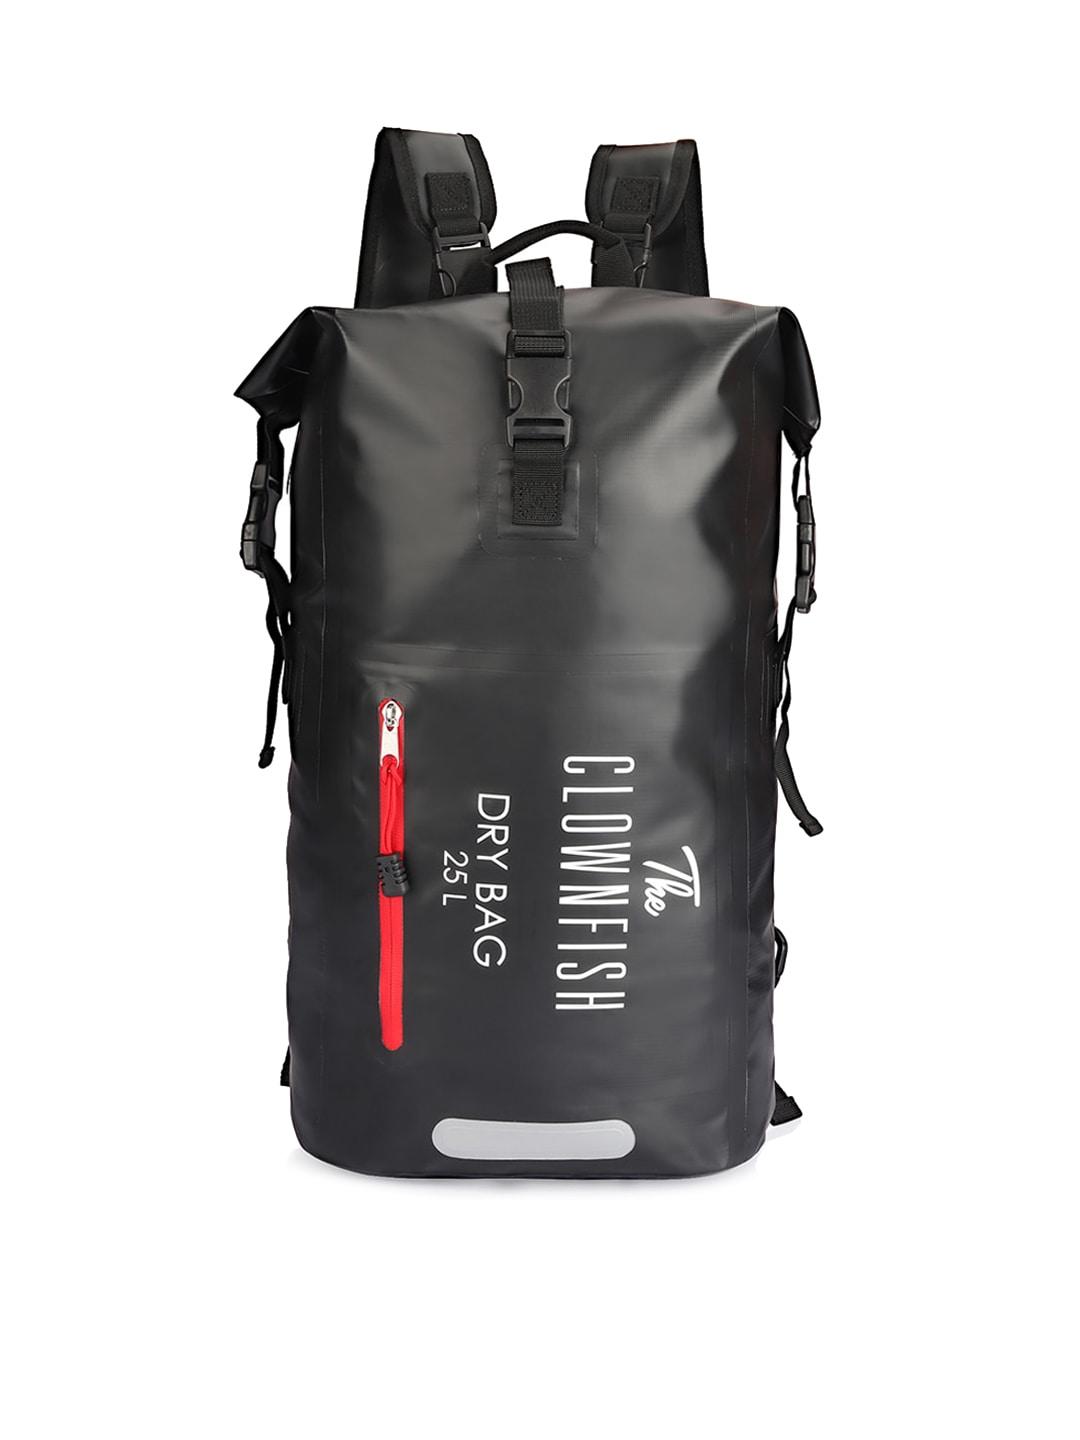 the-clownfish-unisex-black-&-white-typography-backpack